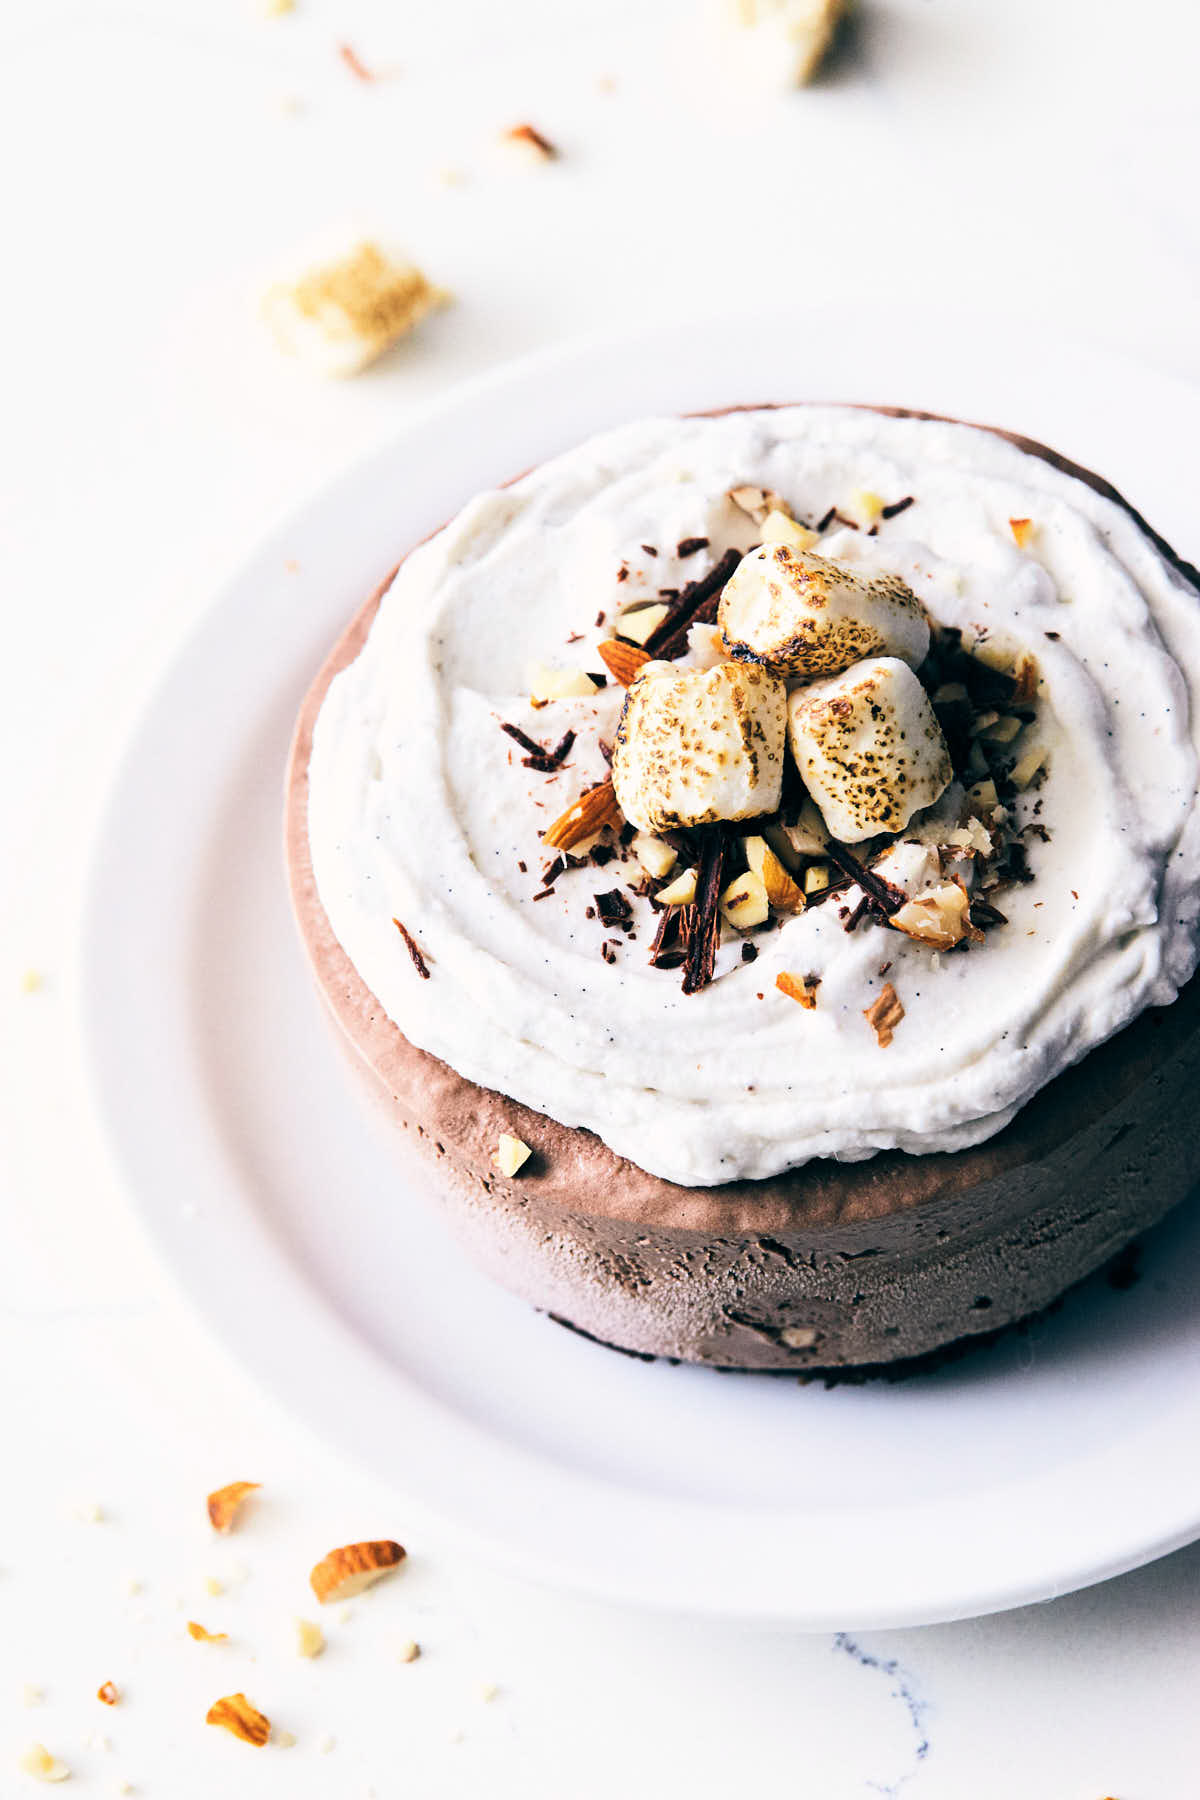 Ice cream cake topped with chopped nuts, chocolate and toasted marshmallows